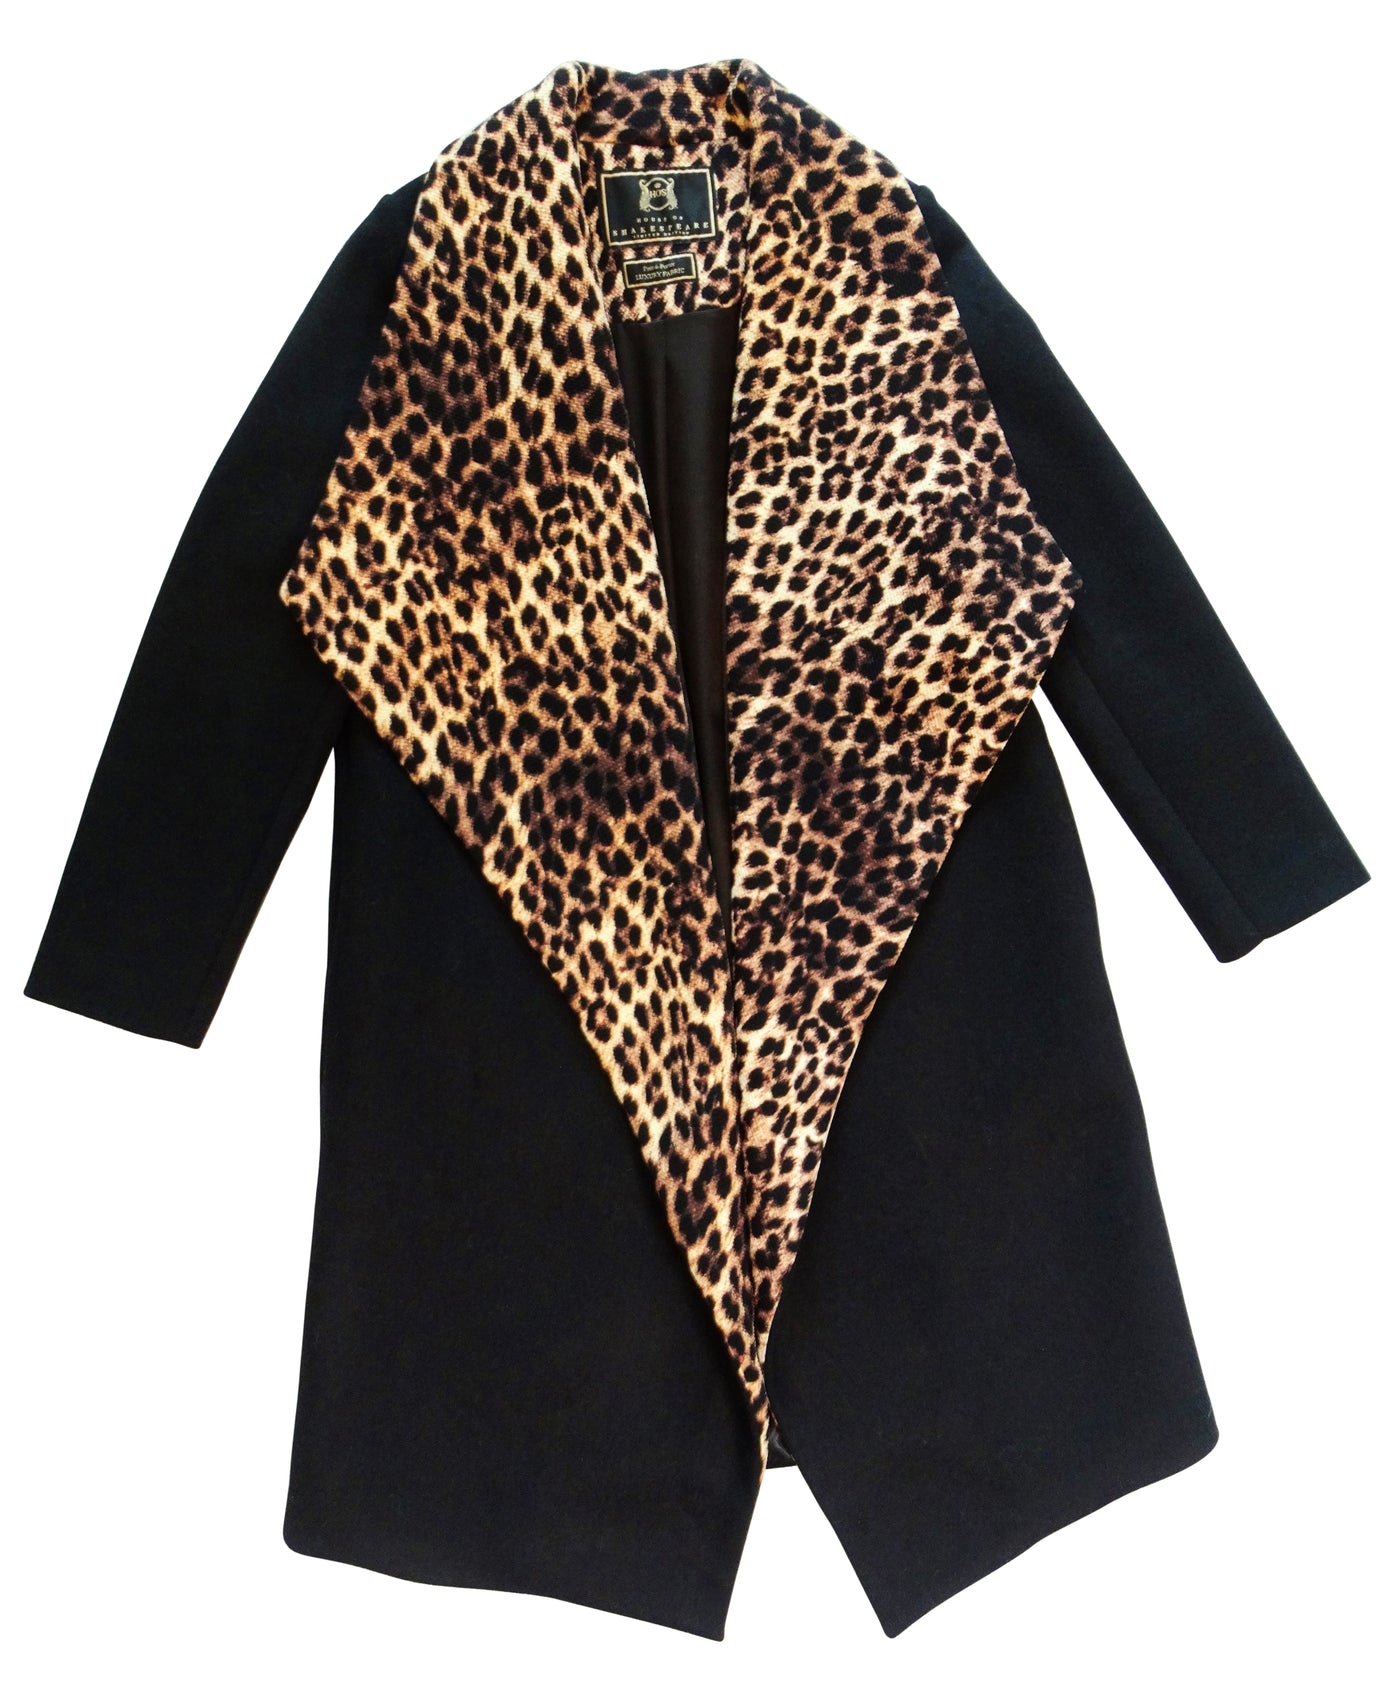 ANIMAL INSTINCT Stand Out 3/4 Coat